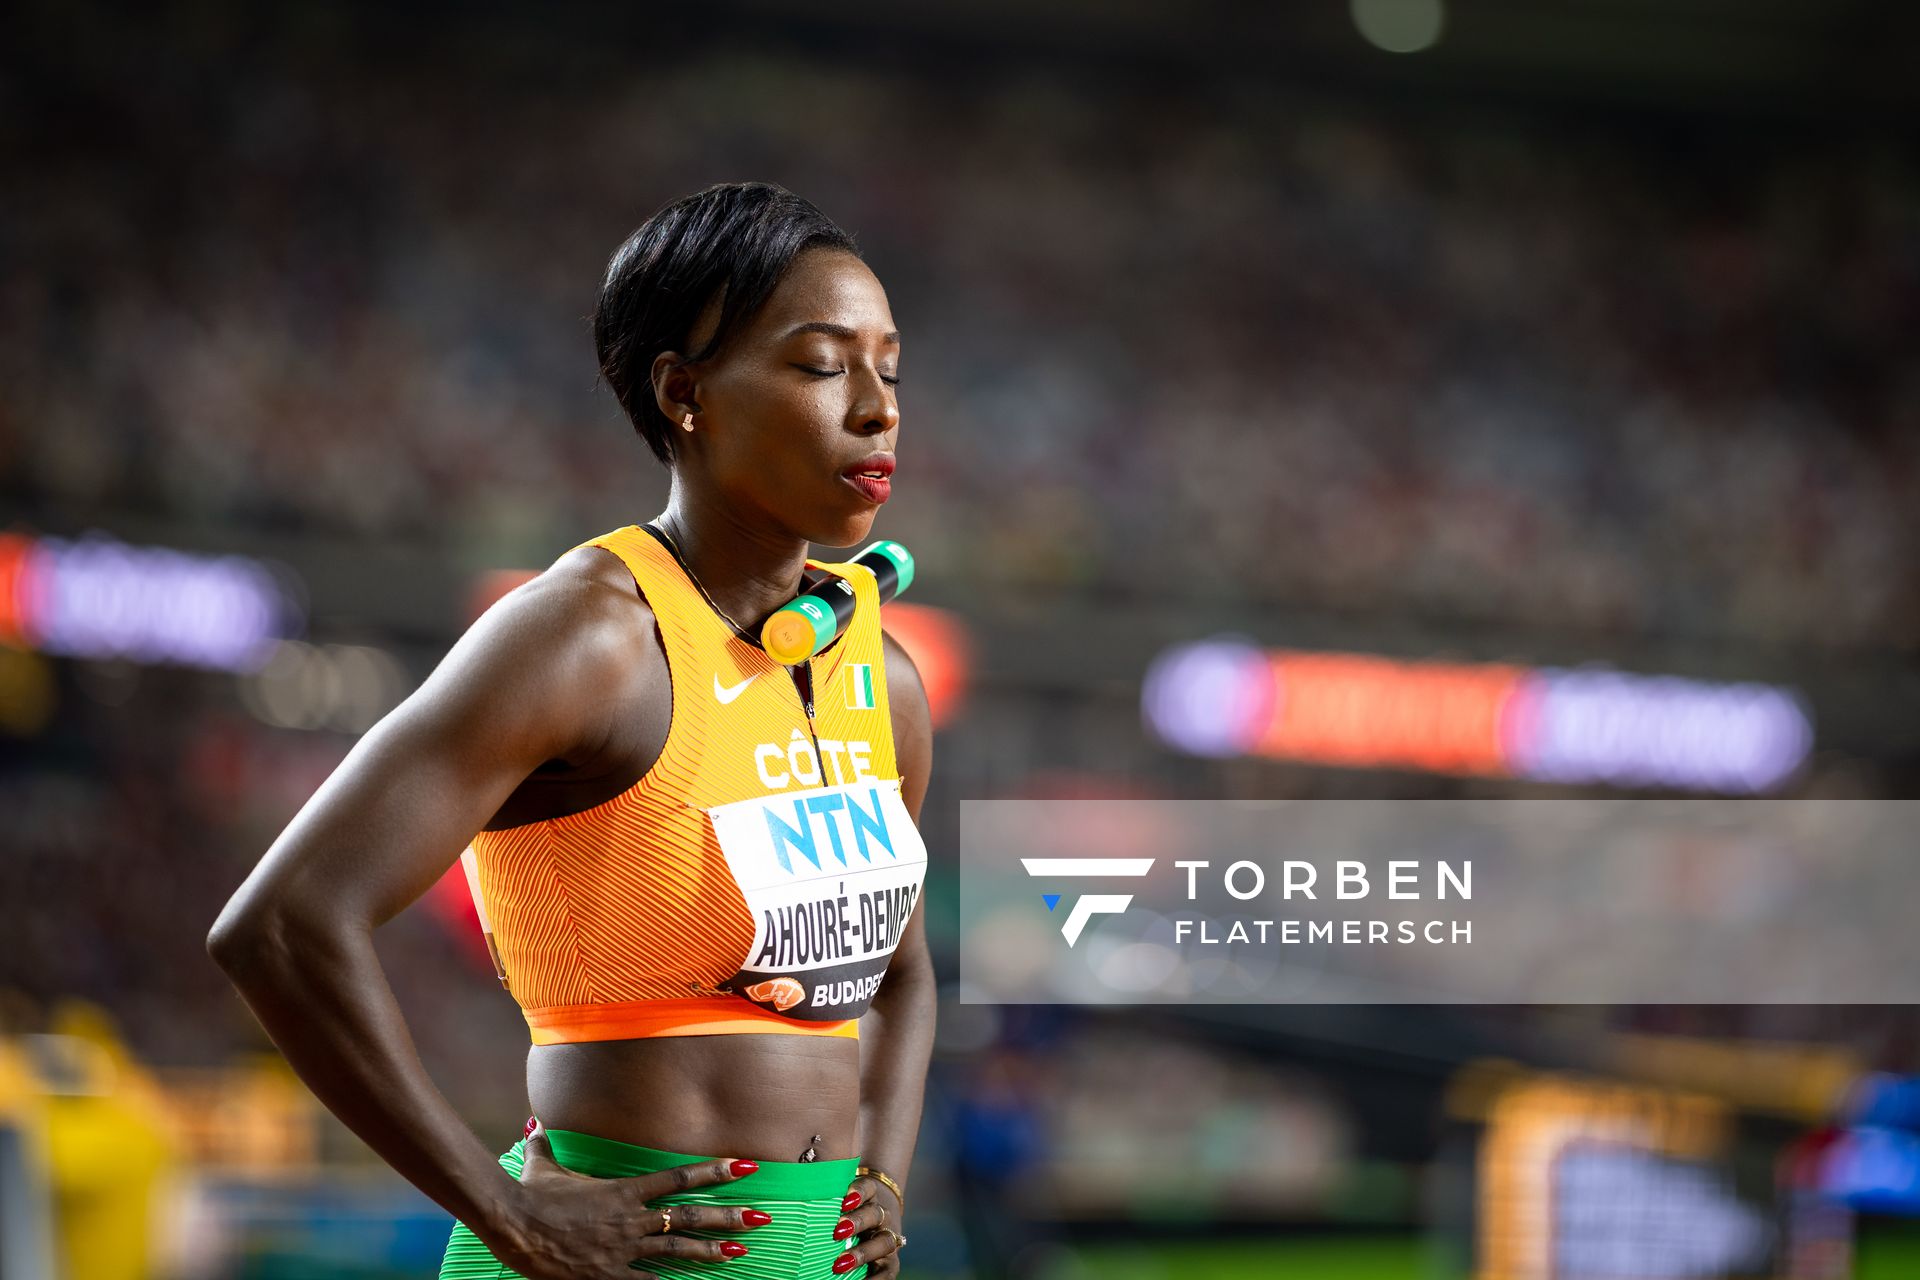 Murielle Ahouré (CIV/Cote D'ivoire) on Day 7 of the World Athletics Championships Budapest 23 at the National Athletics Centre in Budapest, Hungary on August 25, 2023.